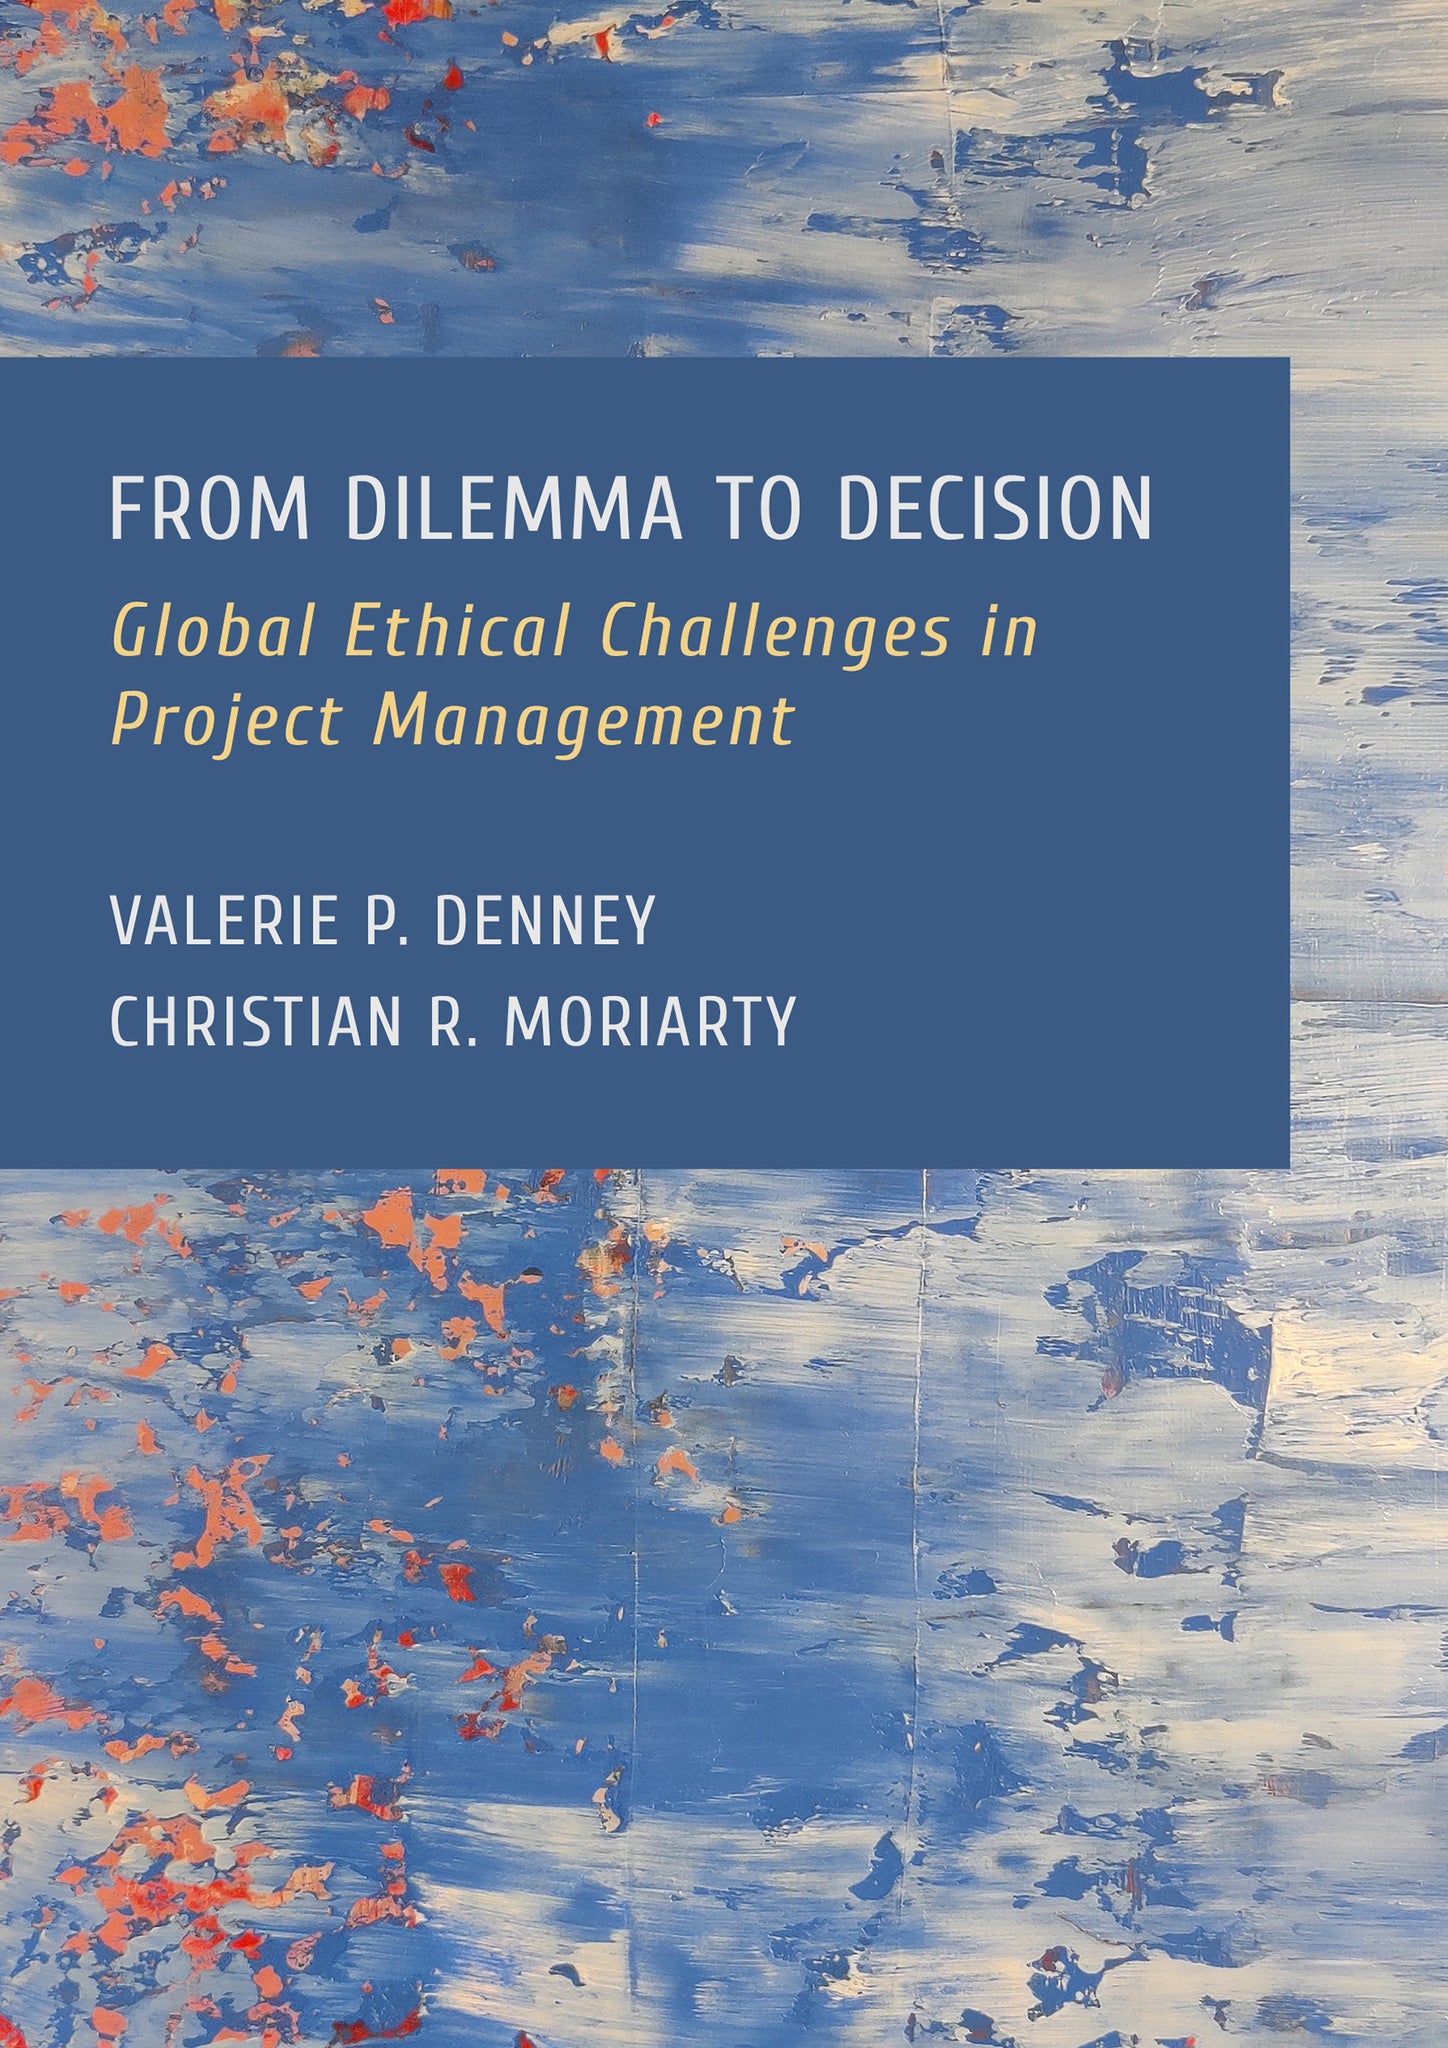 From Dilemma to Decision: Global Ethical Challenges in Project Management